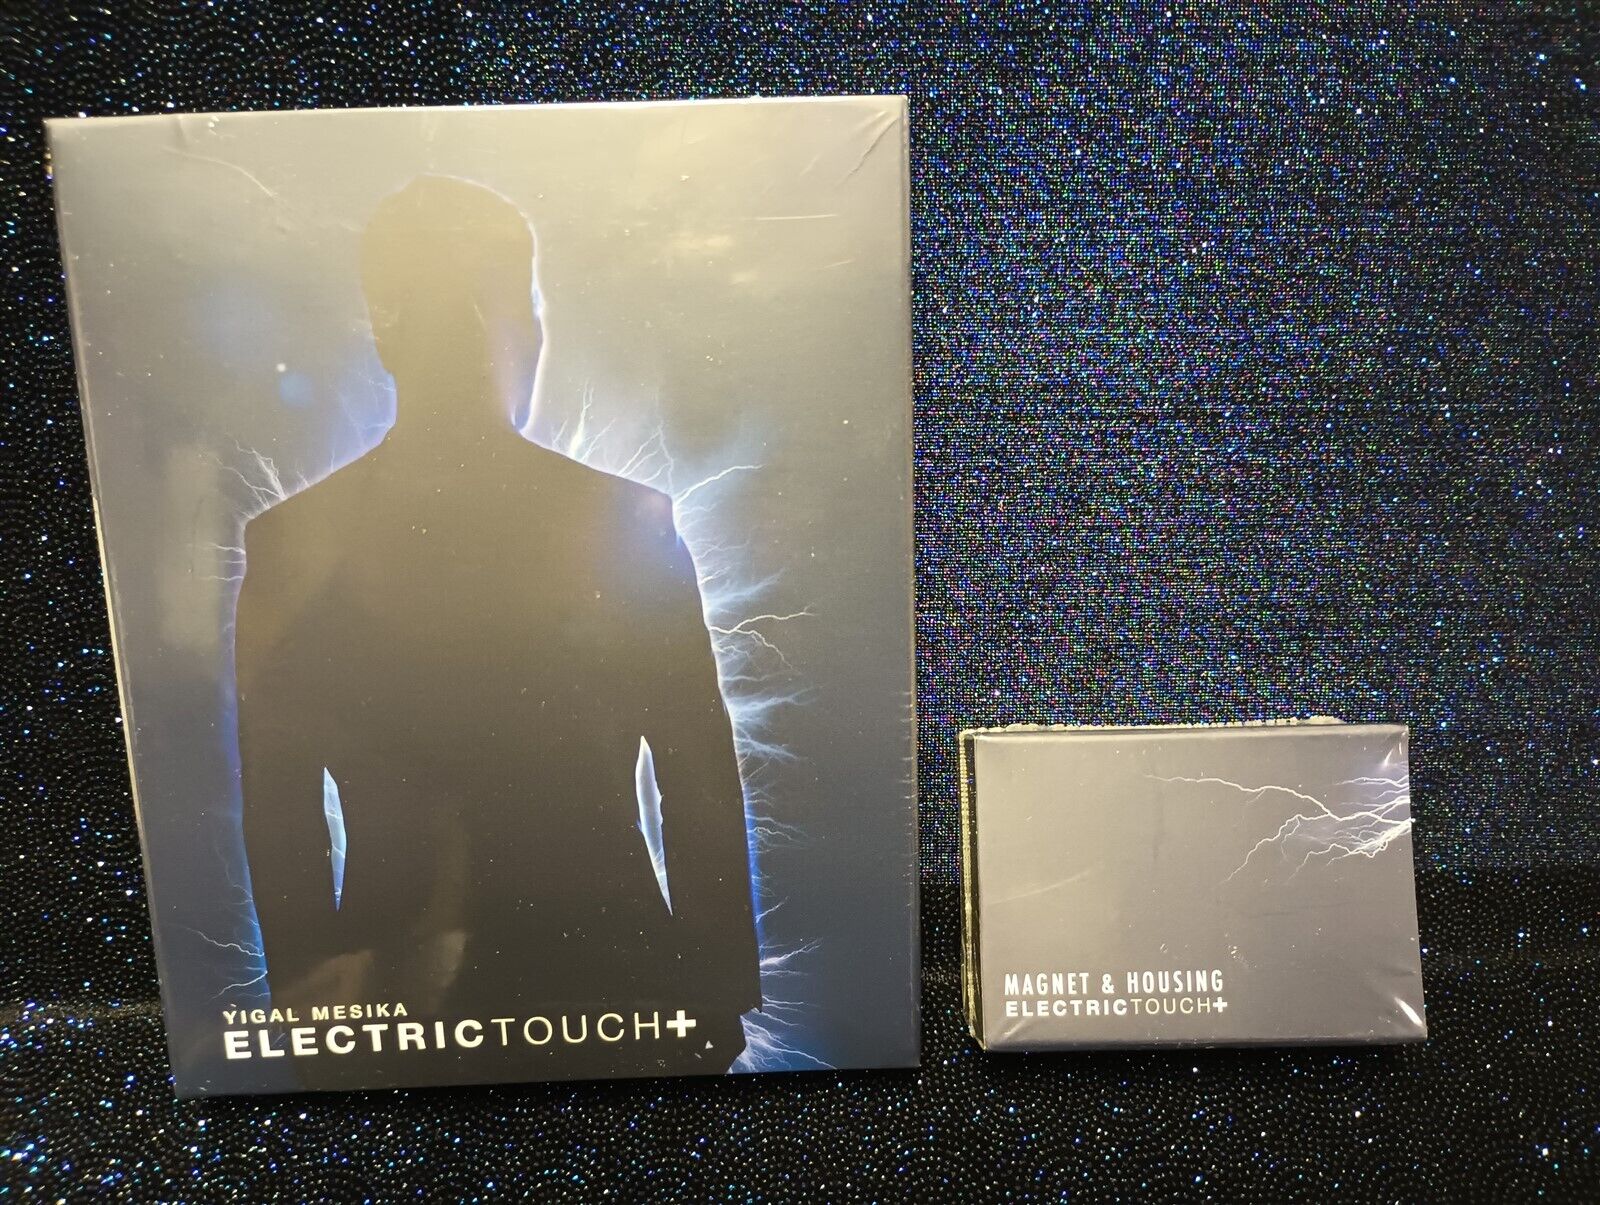 Electric Touch PLUS by Yigal Mesika (DVD and Gimmick) & Accessory Kit